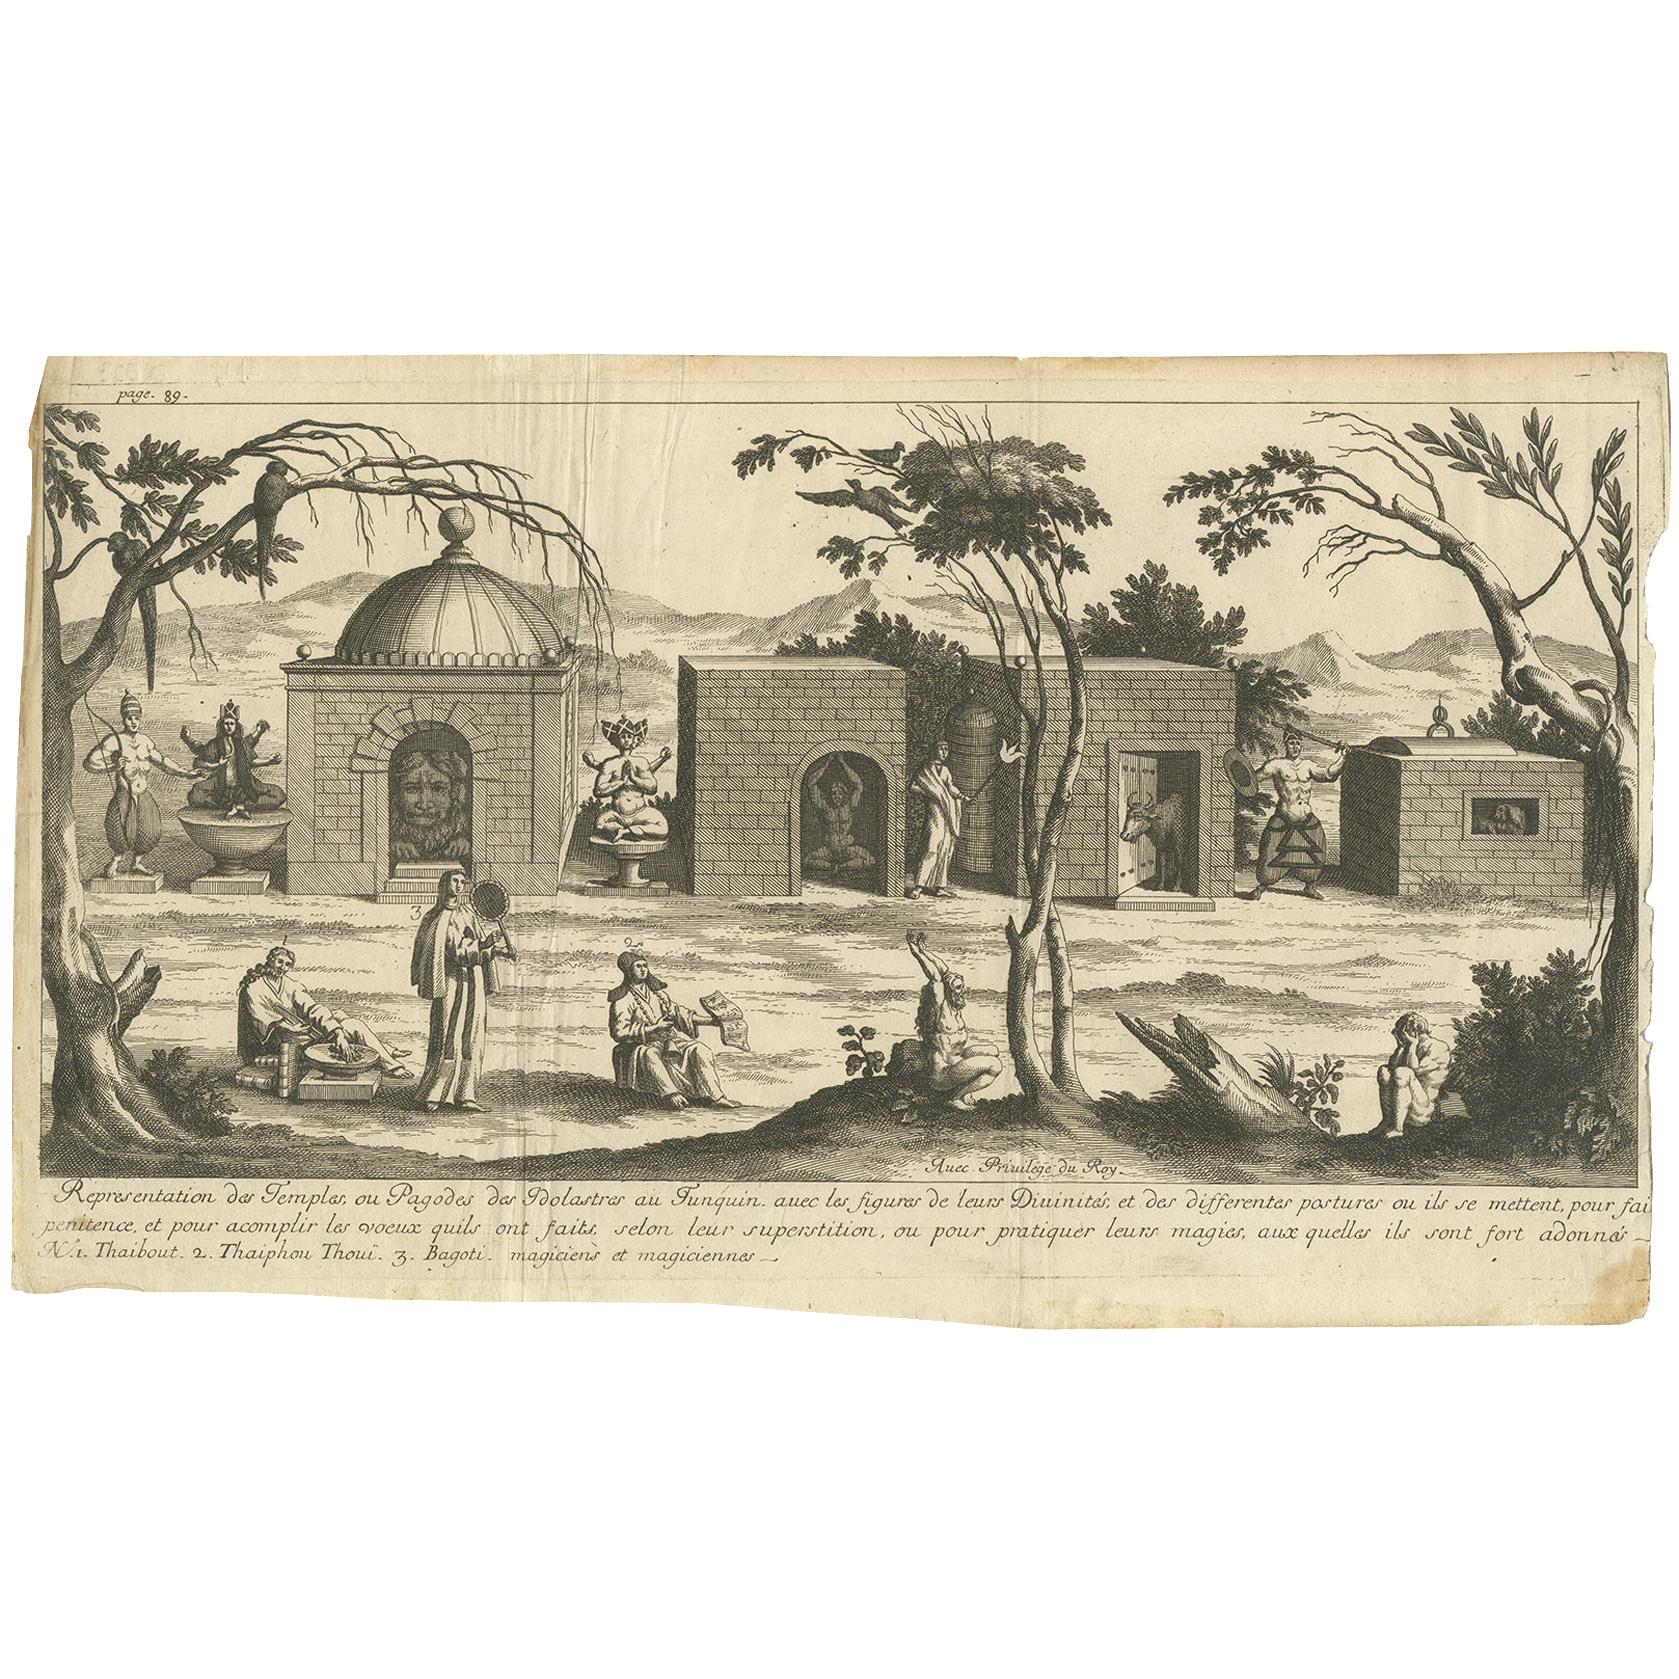 Antique Print of the Temples and Pagodas in Tunquin by Tavernier, '1679'